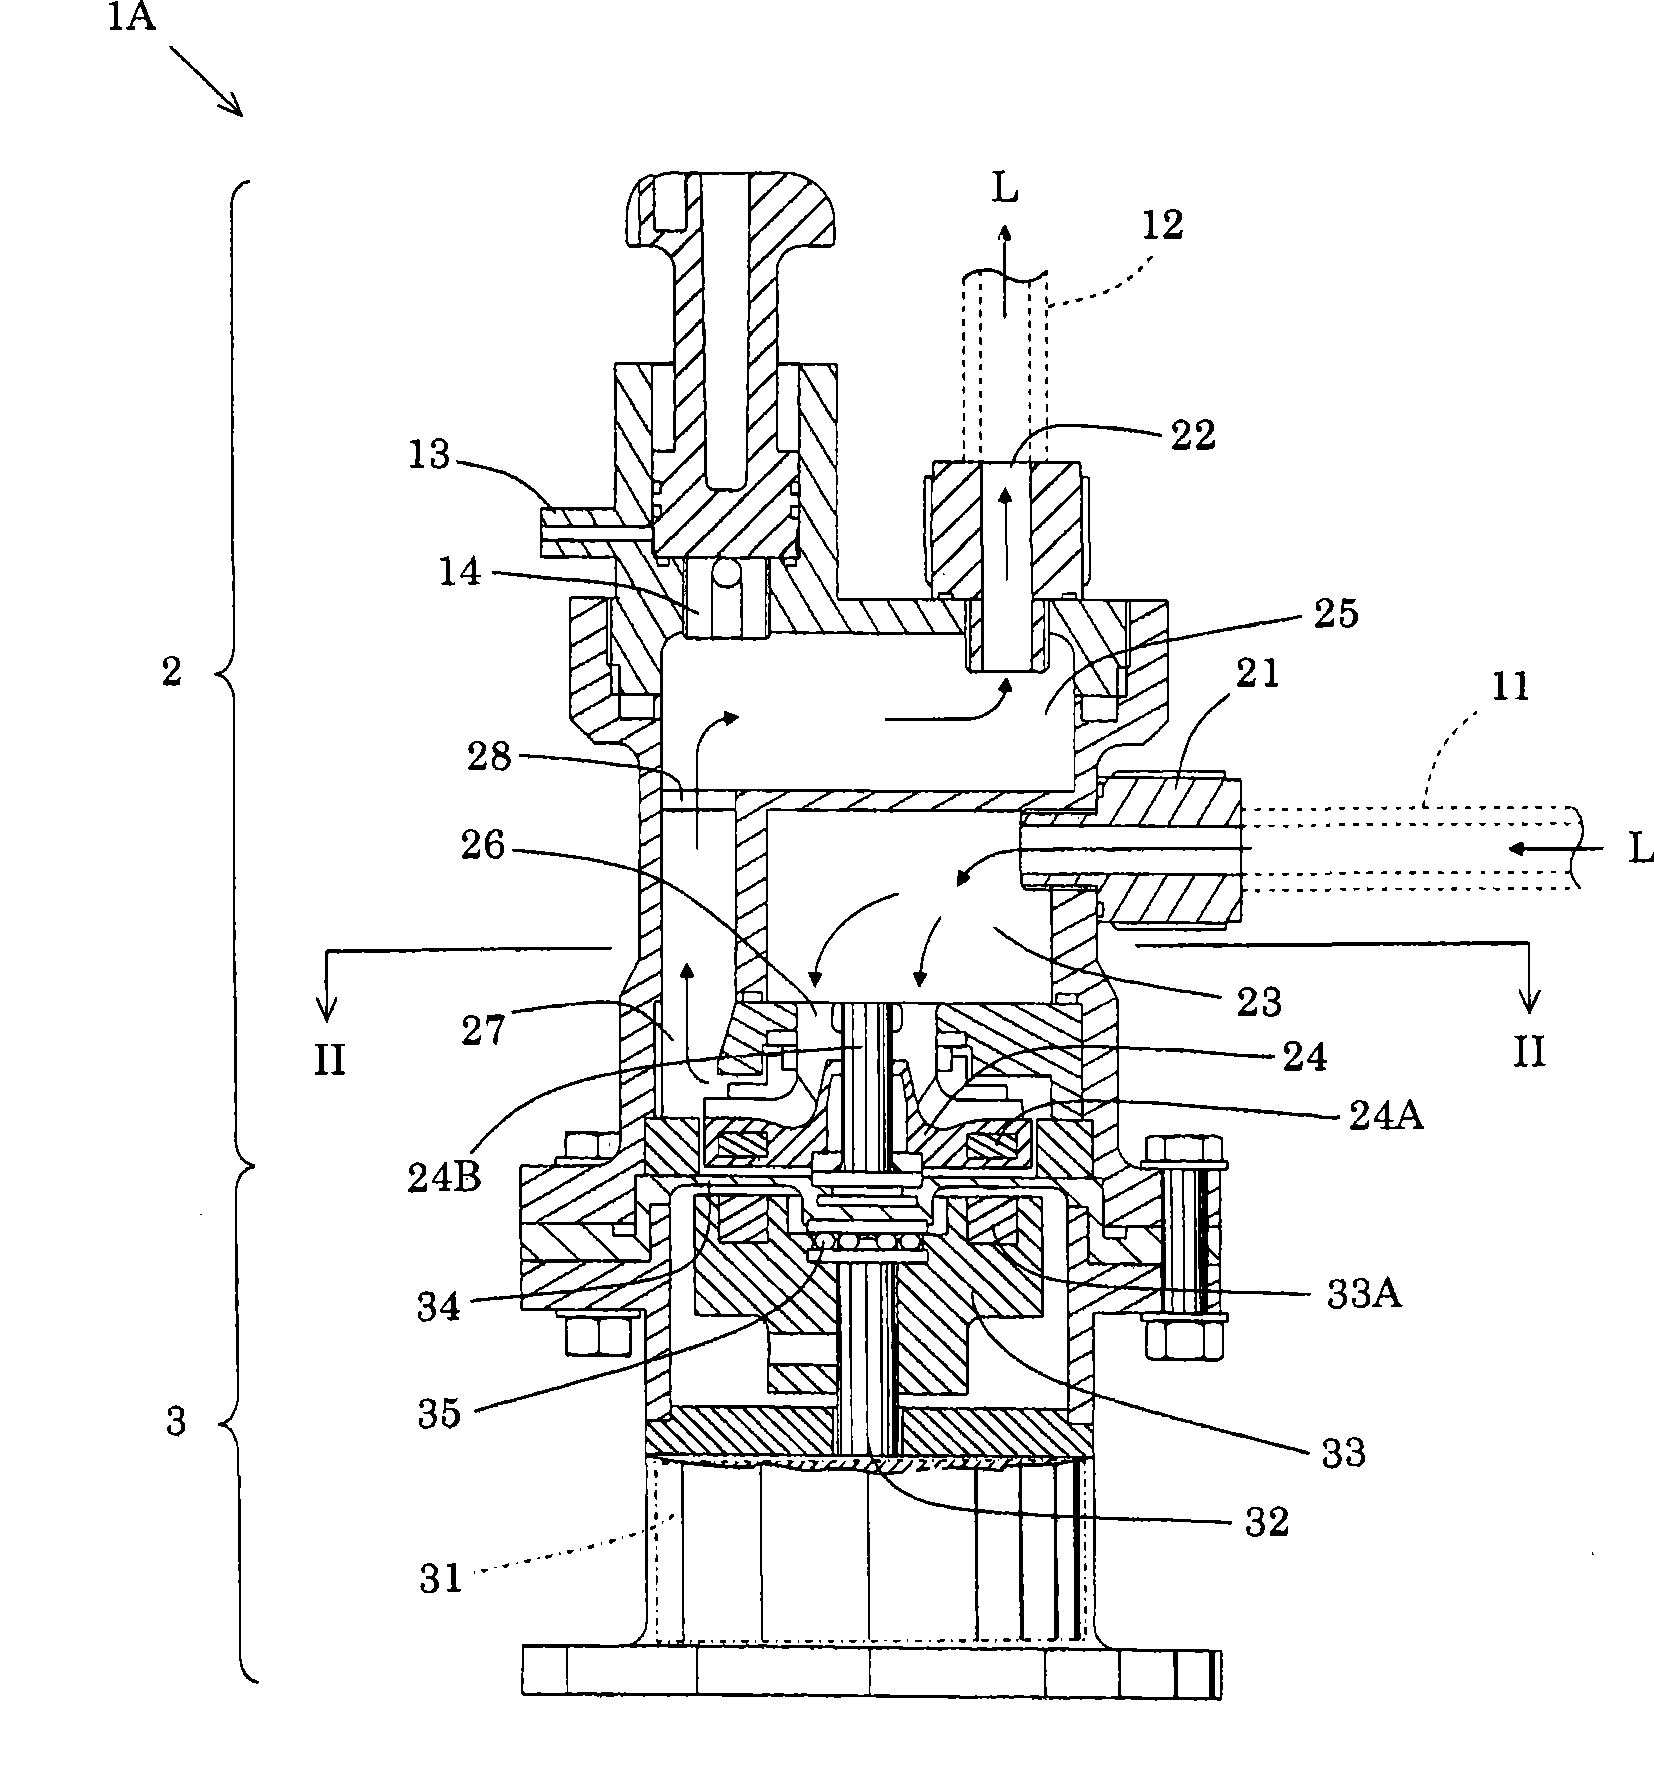 Vertical self-priming pump and vertical self-priming pump with filtration device